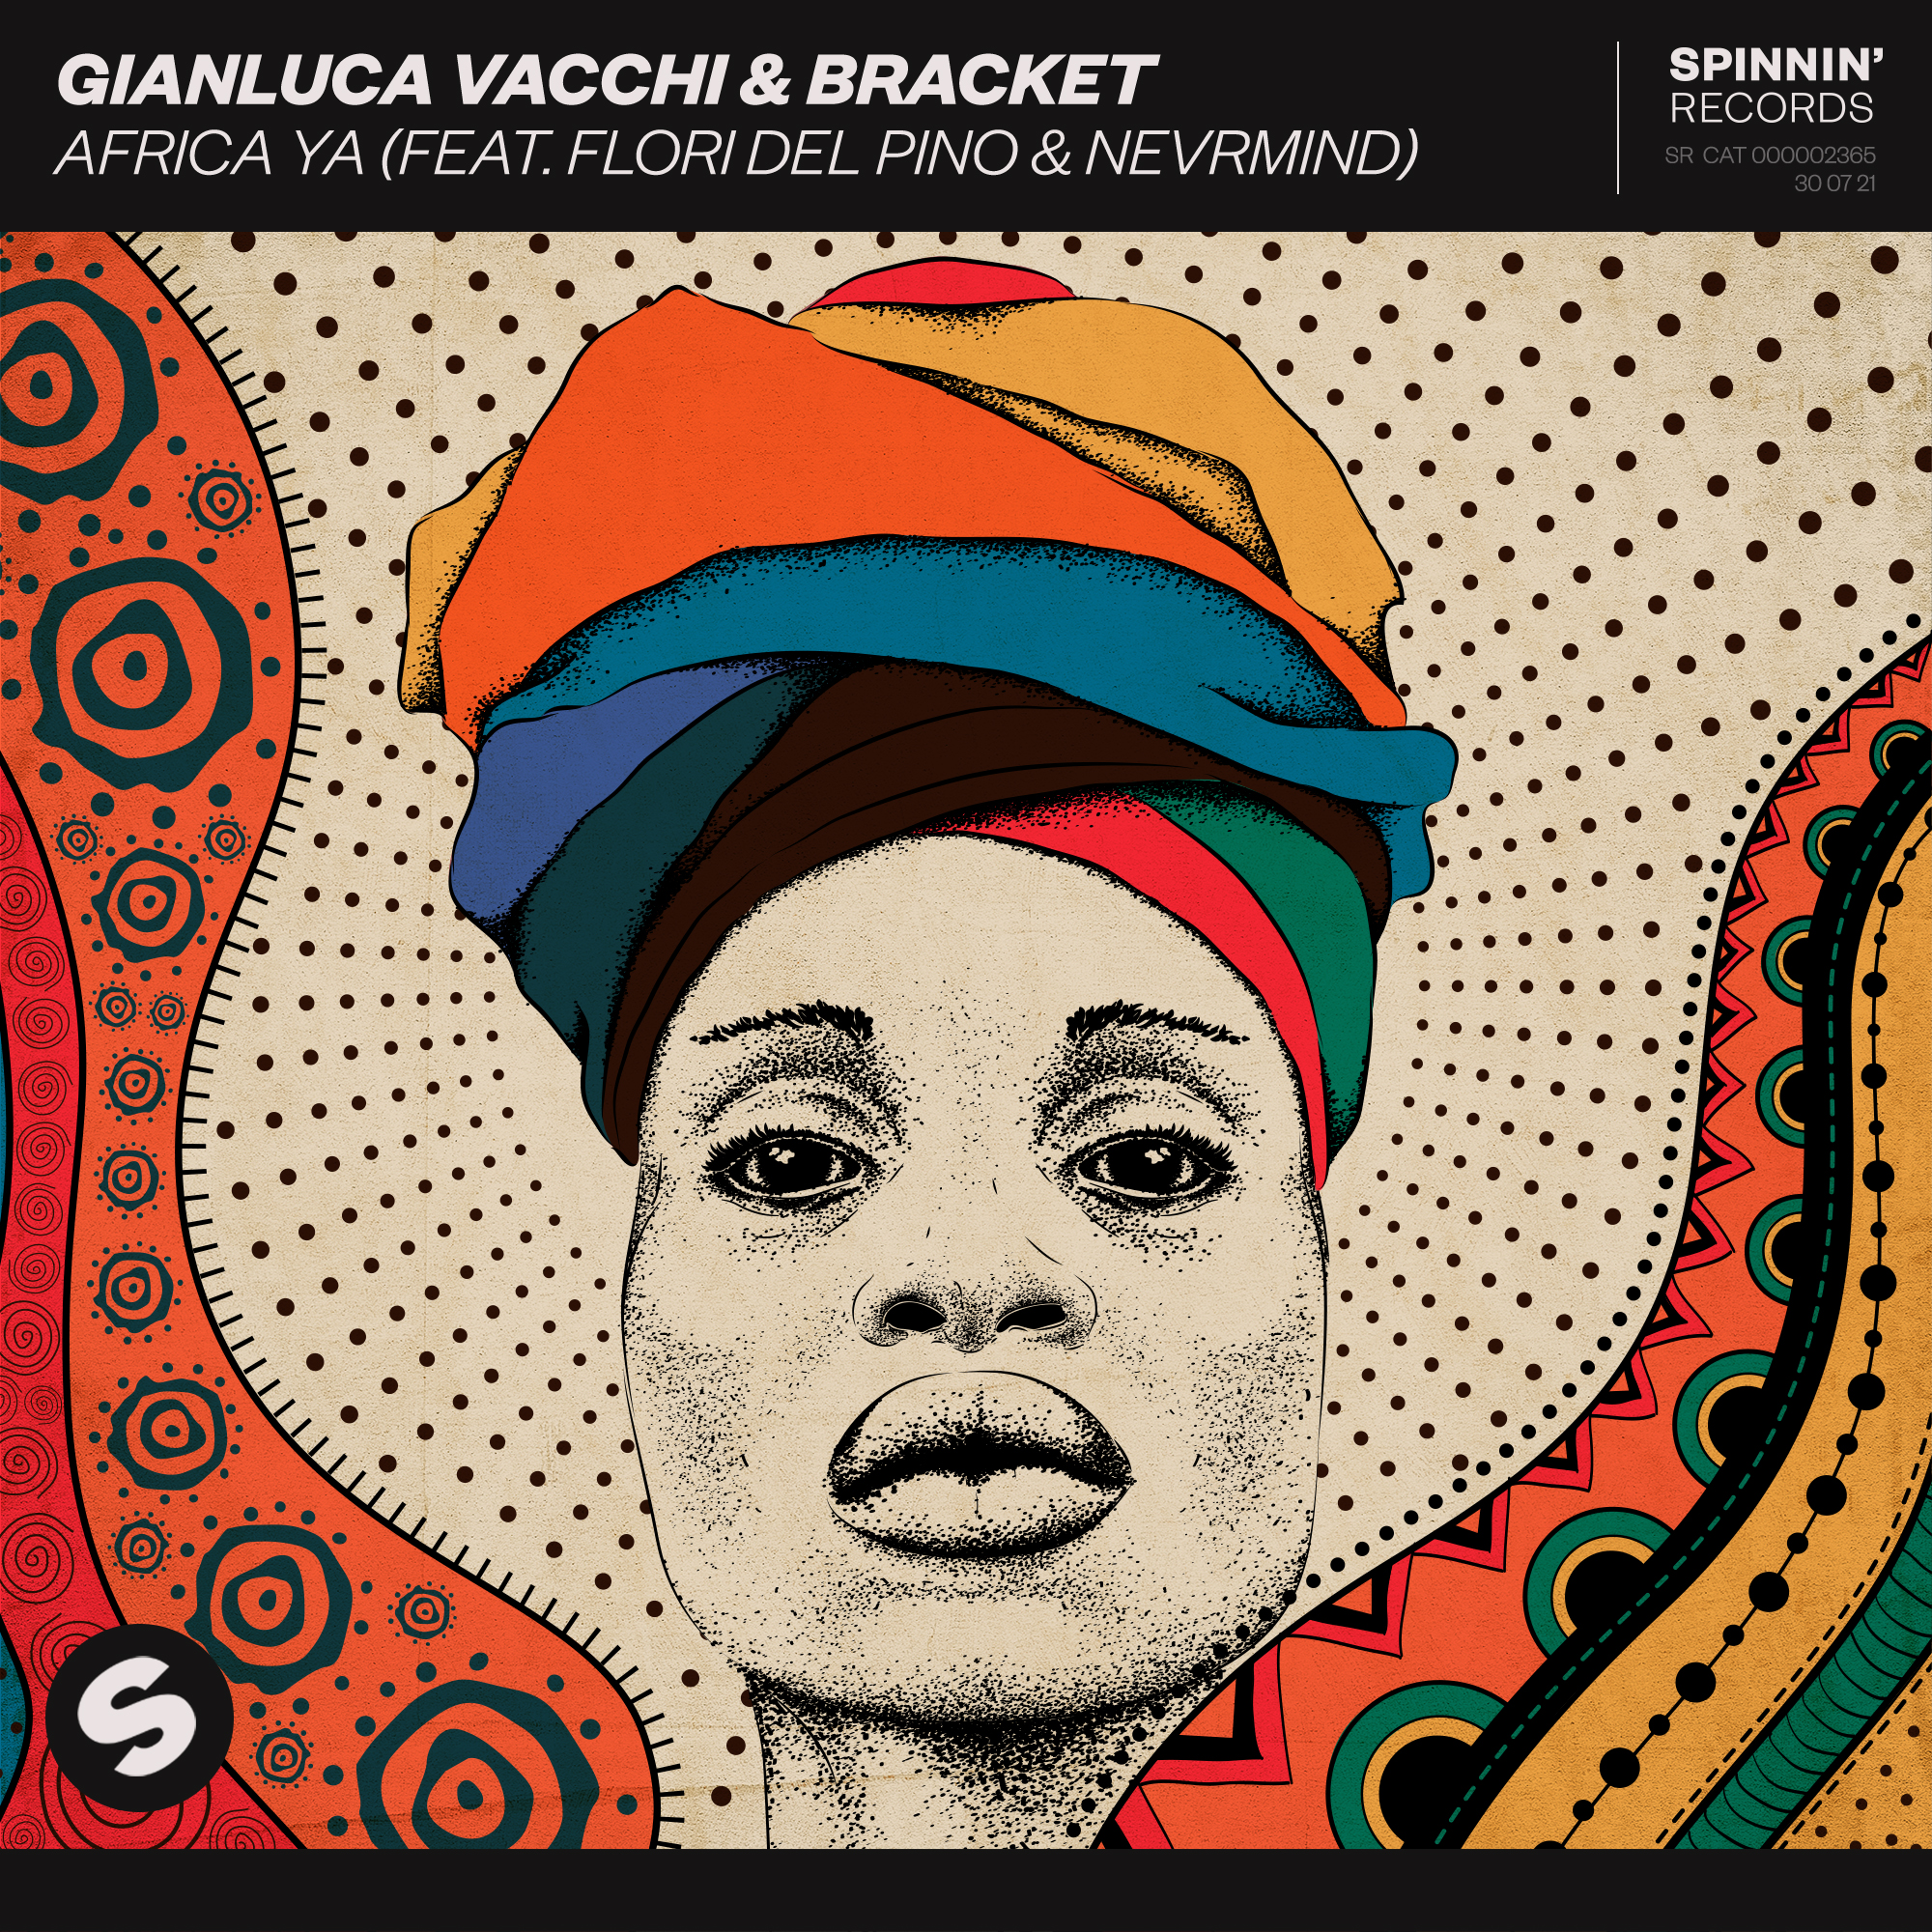 Listen to "Africa Ya," a Remake of Bracket's 2014 Hit "Mama Africa", by  Gianluca Vacchi feat. NEVRMIND and Flori Del Pino on BN | BellaNaija